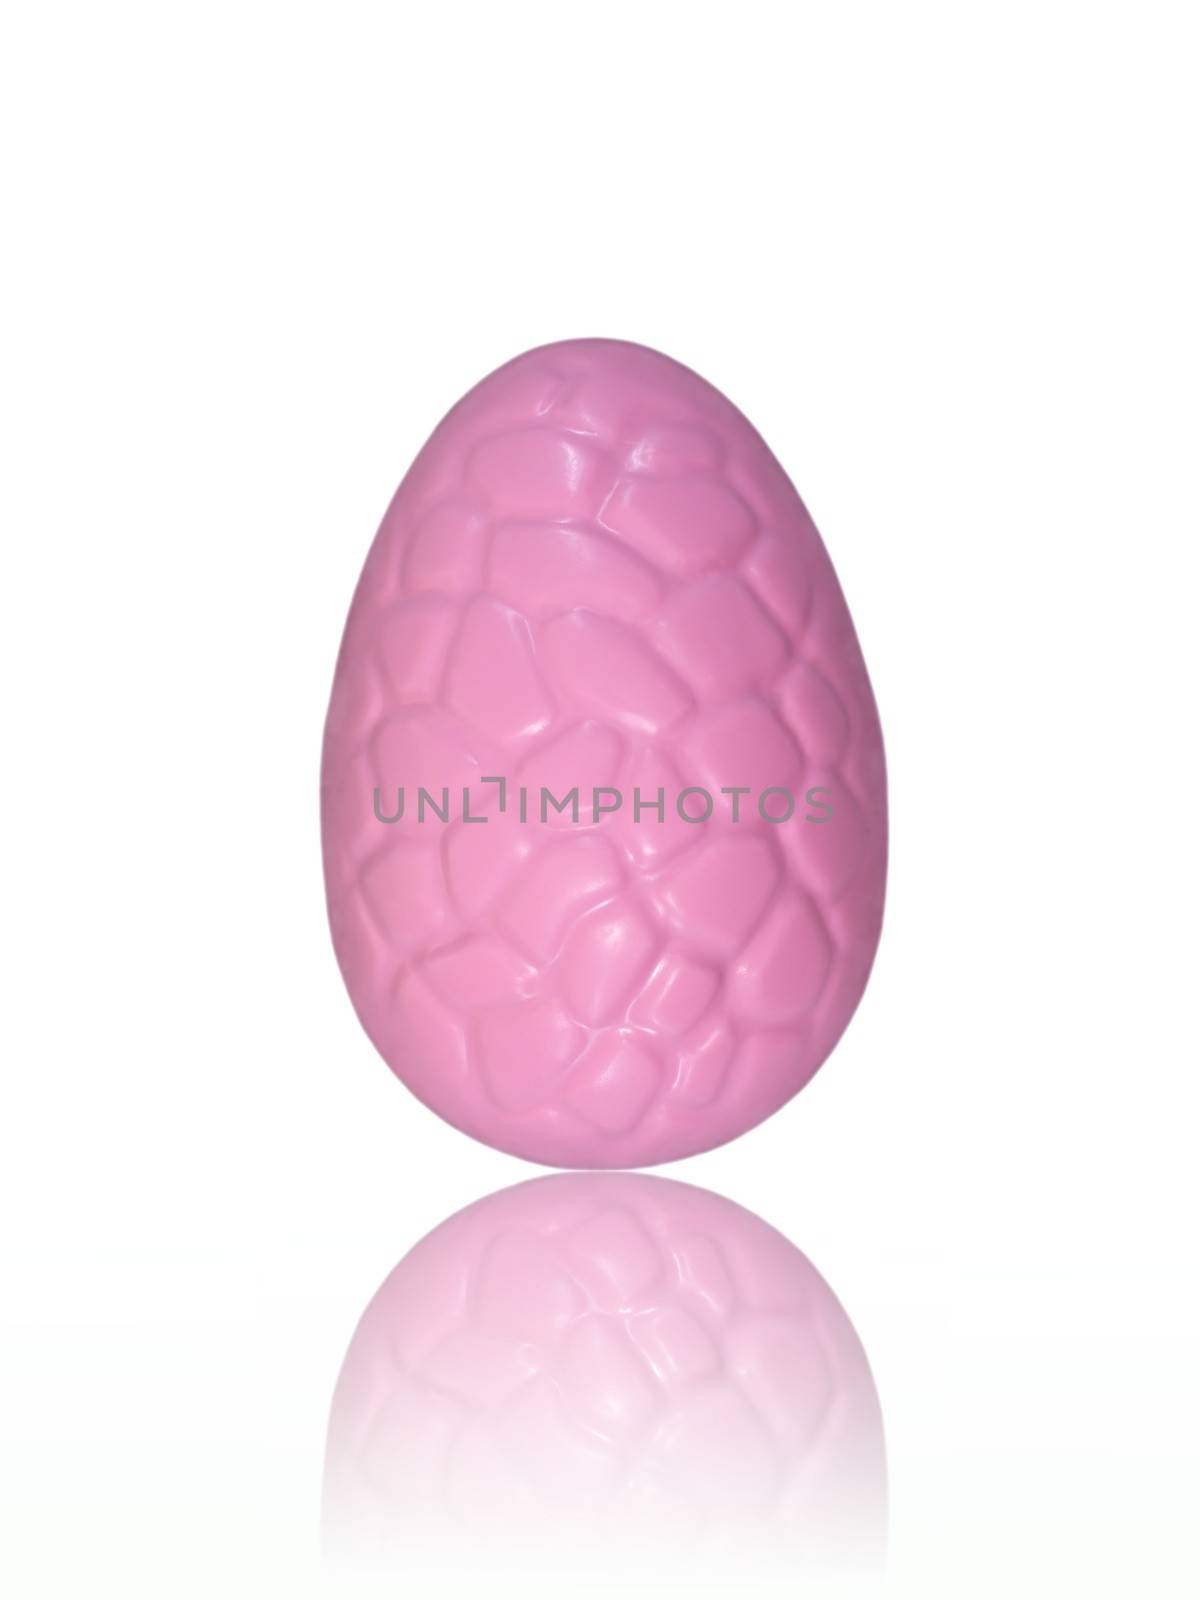 Easter egg moulds isolated against a plain background